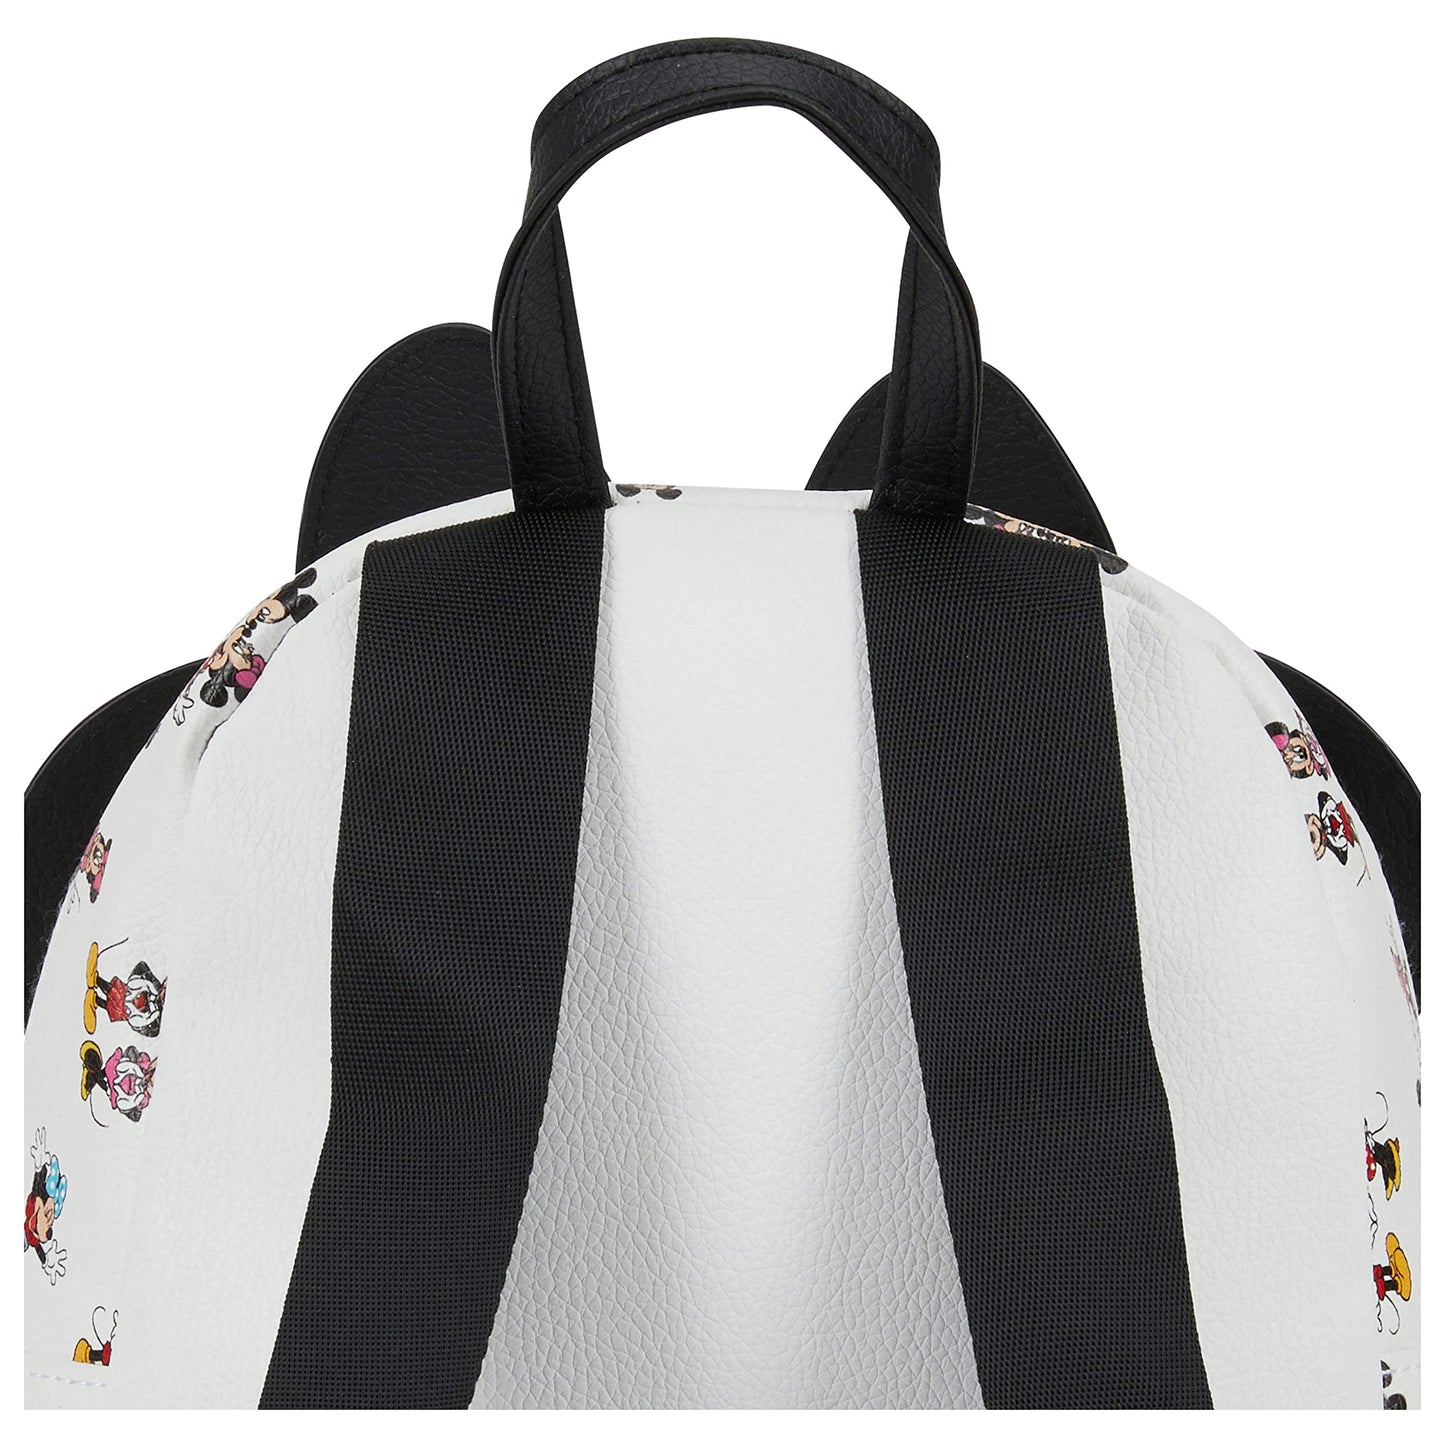 Disney Minnie Mouse Allover Backpack